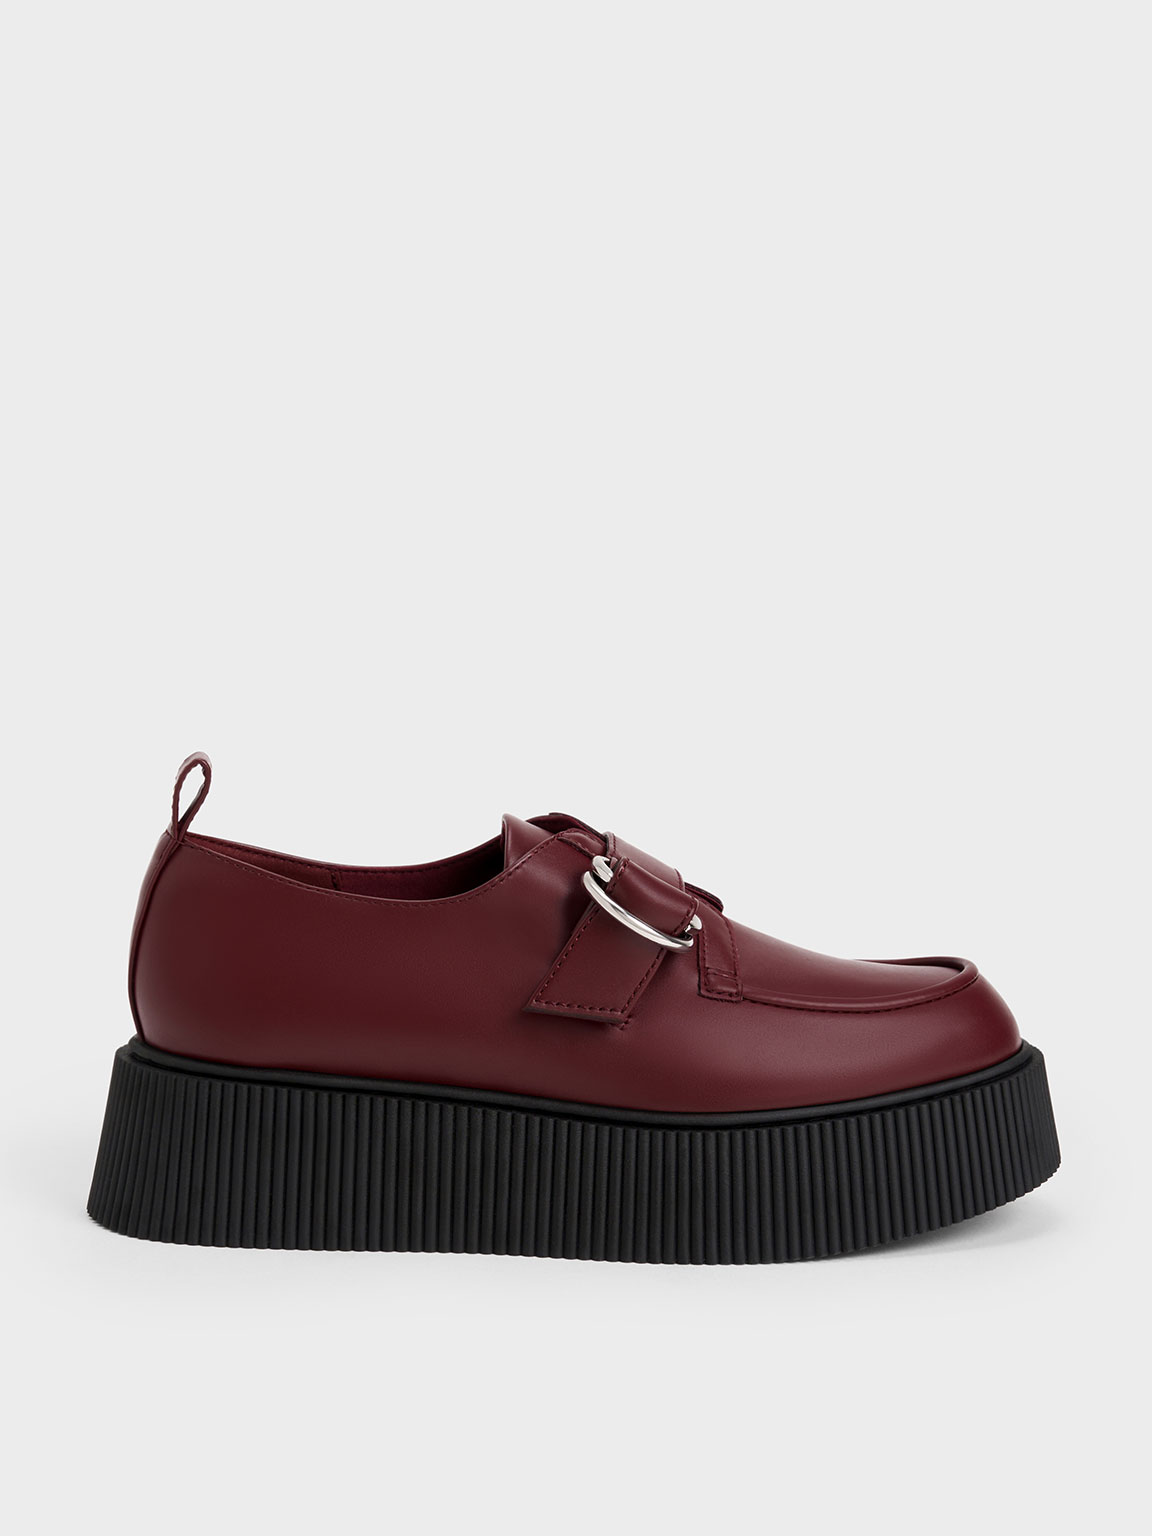 Charles & Keith Cordova Buckled Platform Loafers In Burgundy